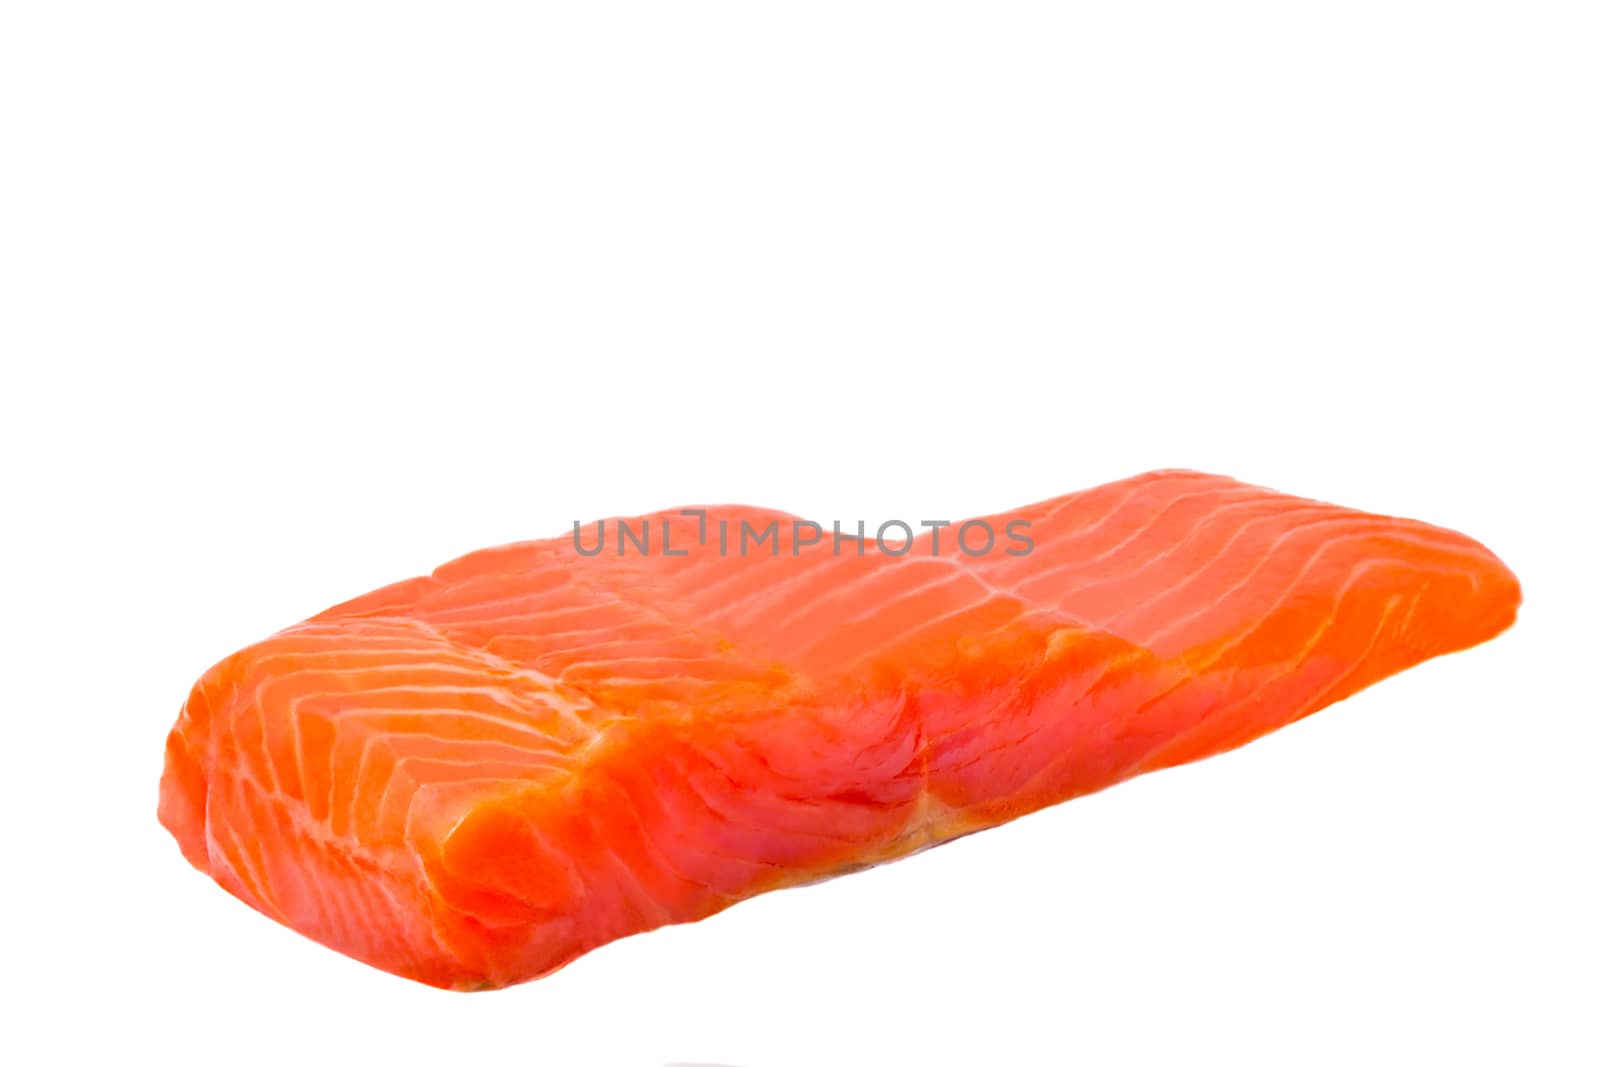 Fillet of salmon - trout on a white background. by georgina198